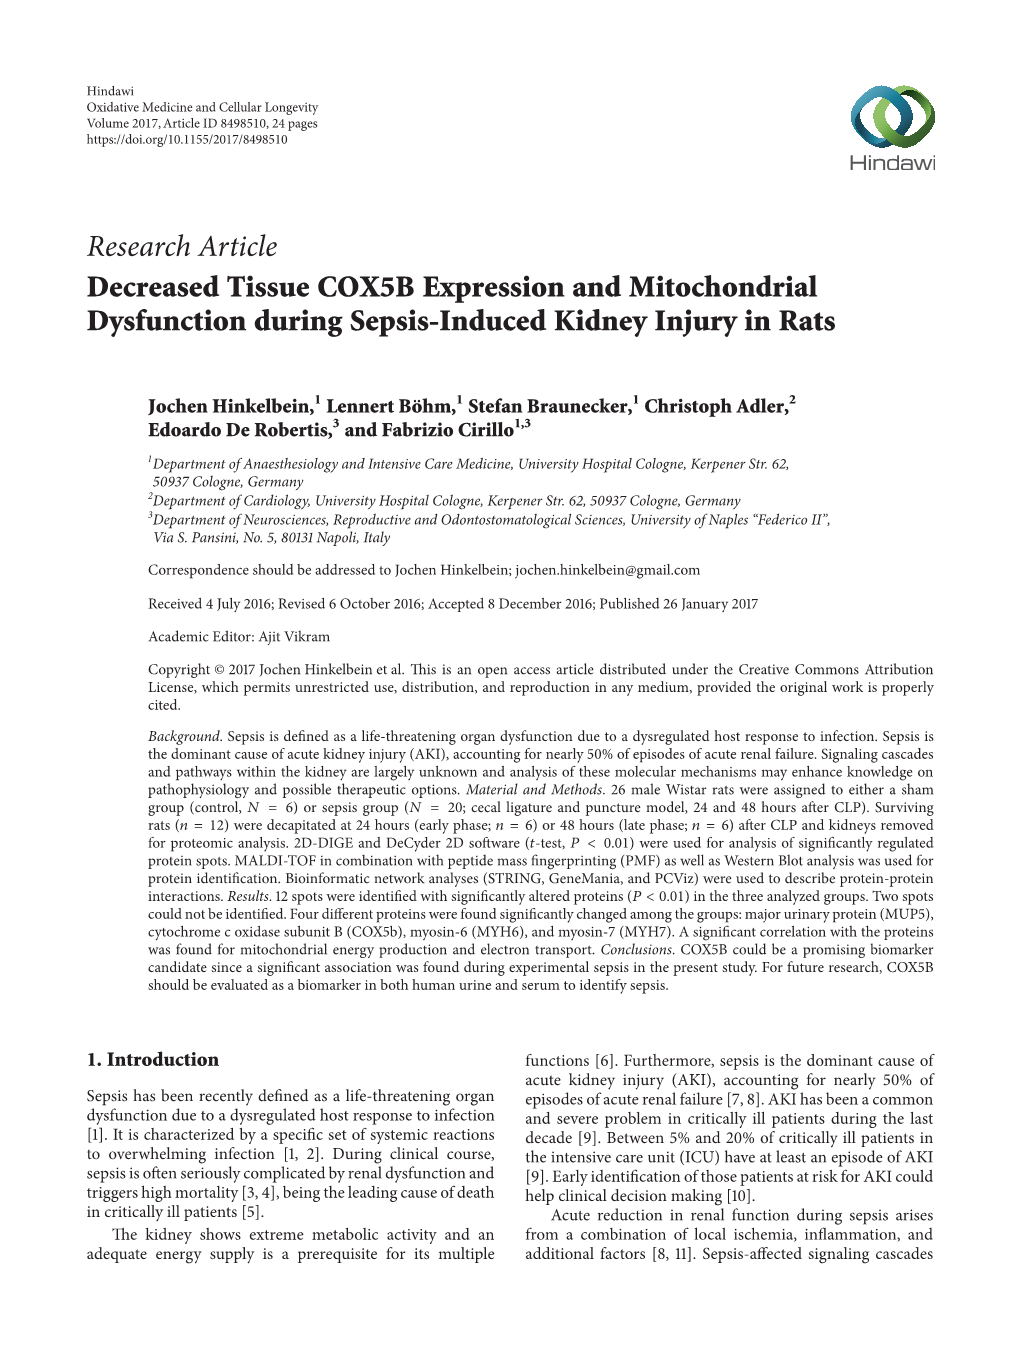 Research Article Decreased Tissue COX5B Expression and Mitochondrial Dysfunction During Sepsis-Induced Kidney Injury in Rats